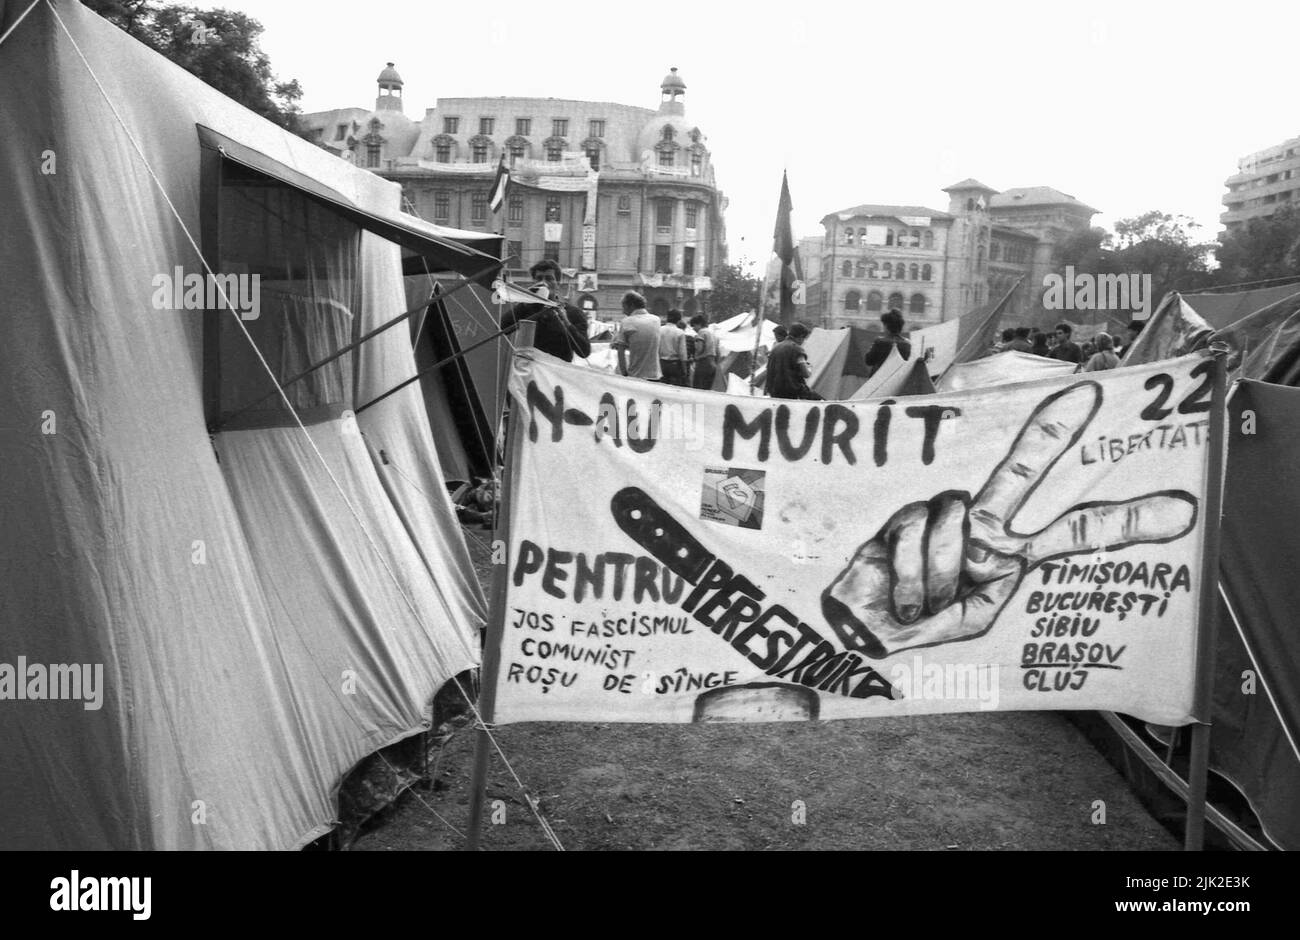 Bucharest, Romania, May 1990. 'Golaniada', a major anti-communism protest  in the University Square following the Romanian Revolution of 1989. People would gather daily to protest the ex-communists that took the power after the Revolution. The main demand was that no former party member would be allowed to run in the elections of May 20th. In this picture, taken in the days following the elections, people are literally camping in the square in protest of the 'rigged' elections. A banner says 'They did not died for Perestroika'. Stock Photo